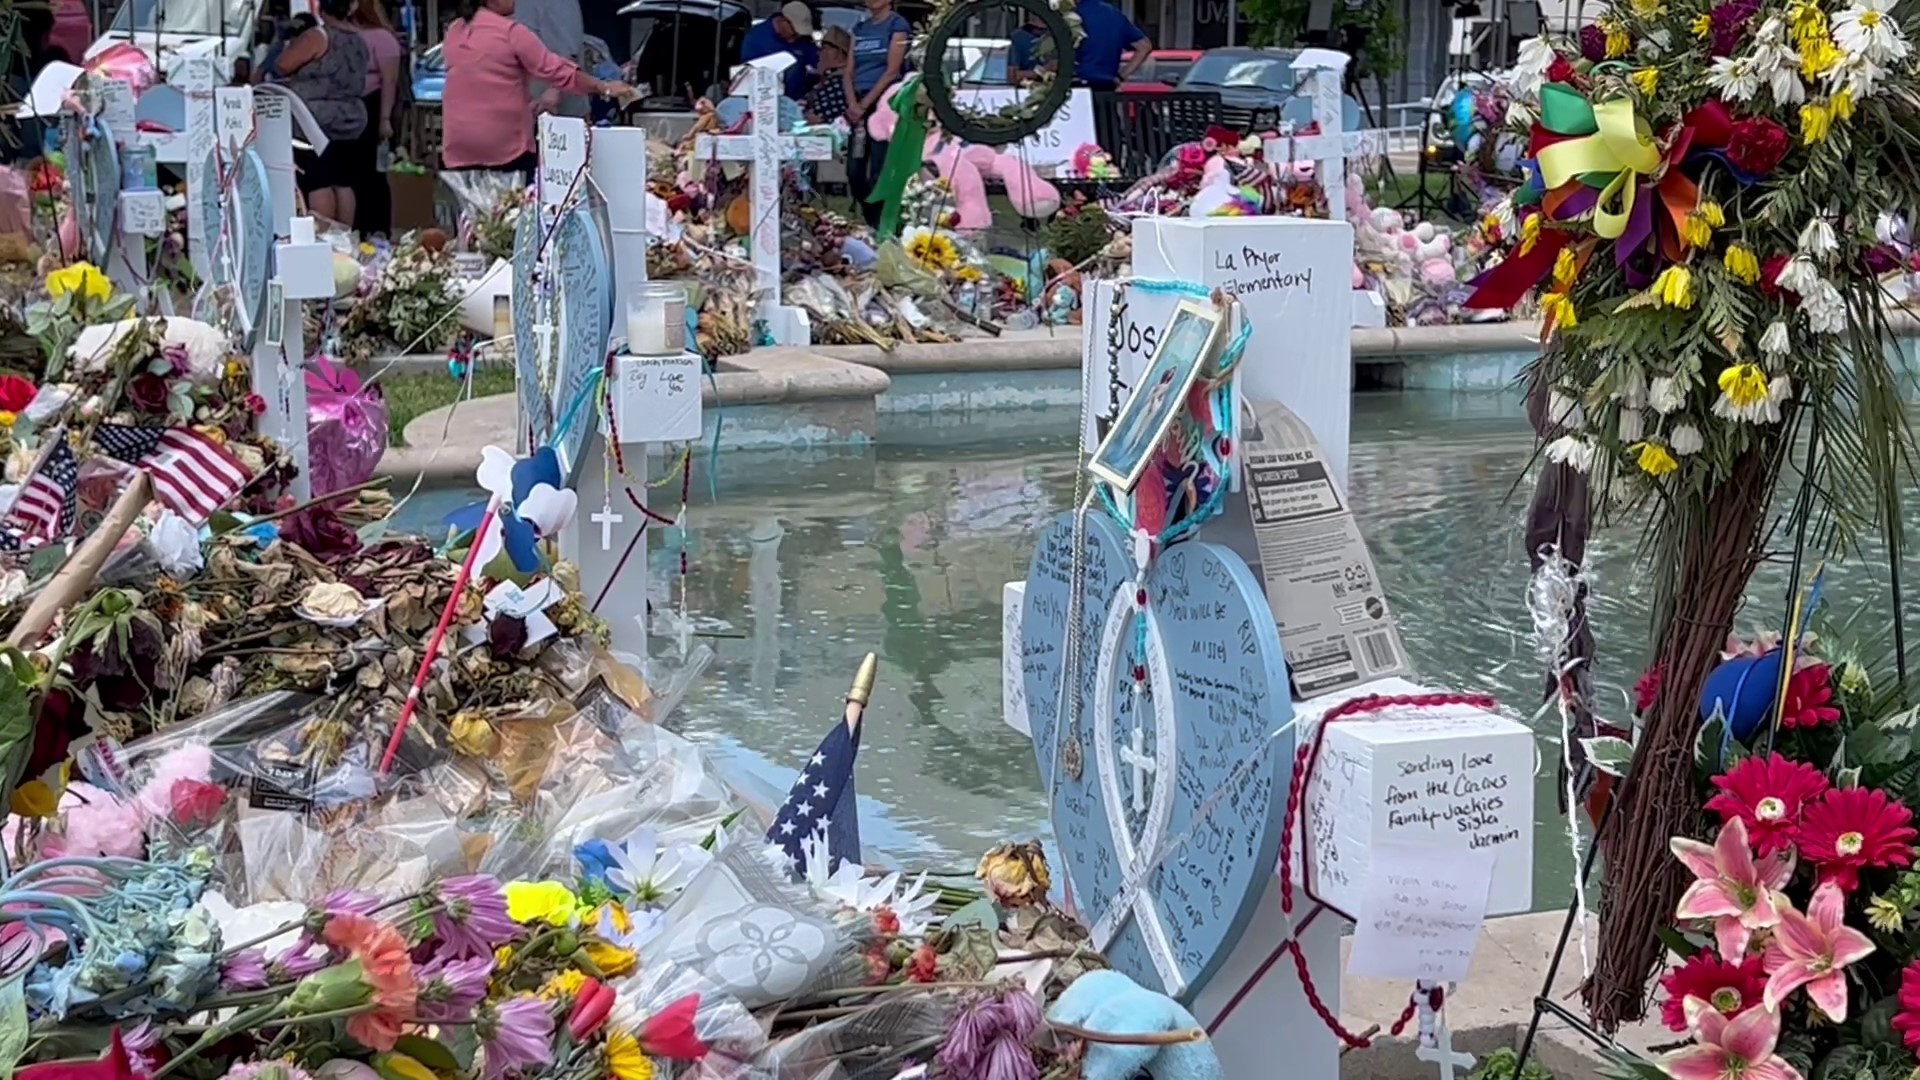 Right now, 22 of those crosses circle the fountain in Uvalde's town square.